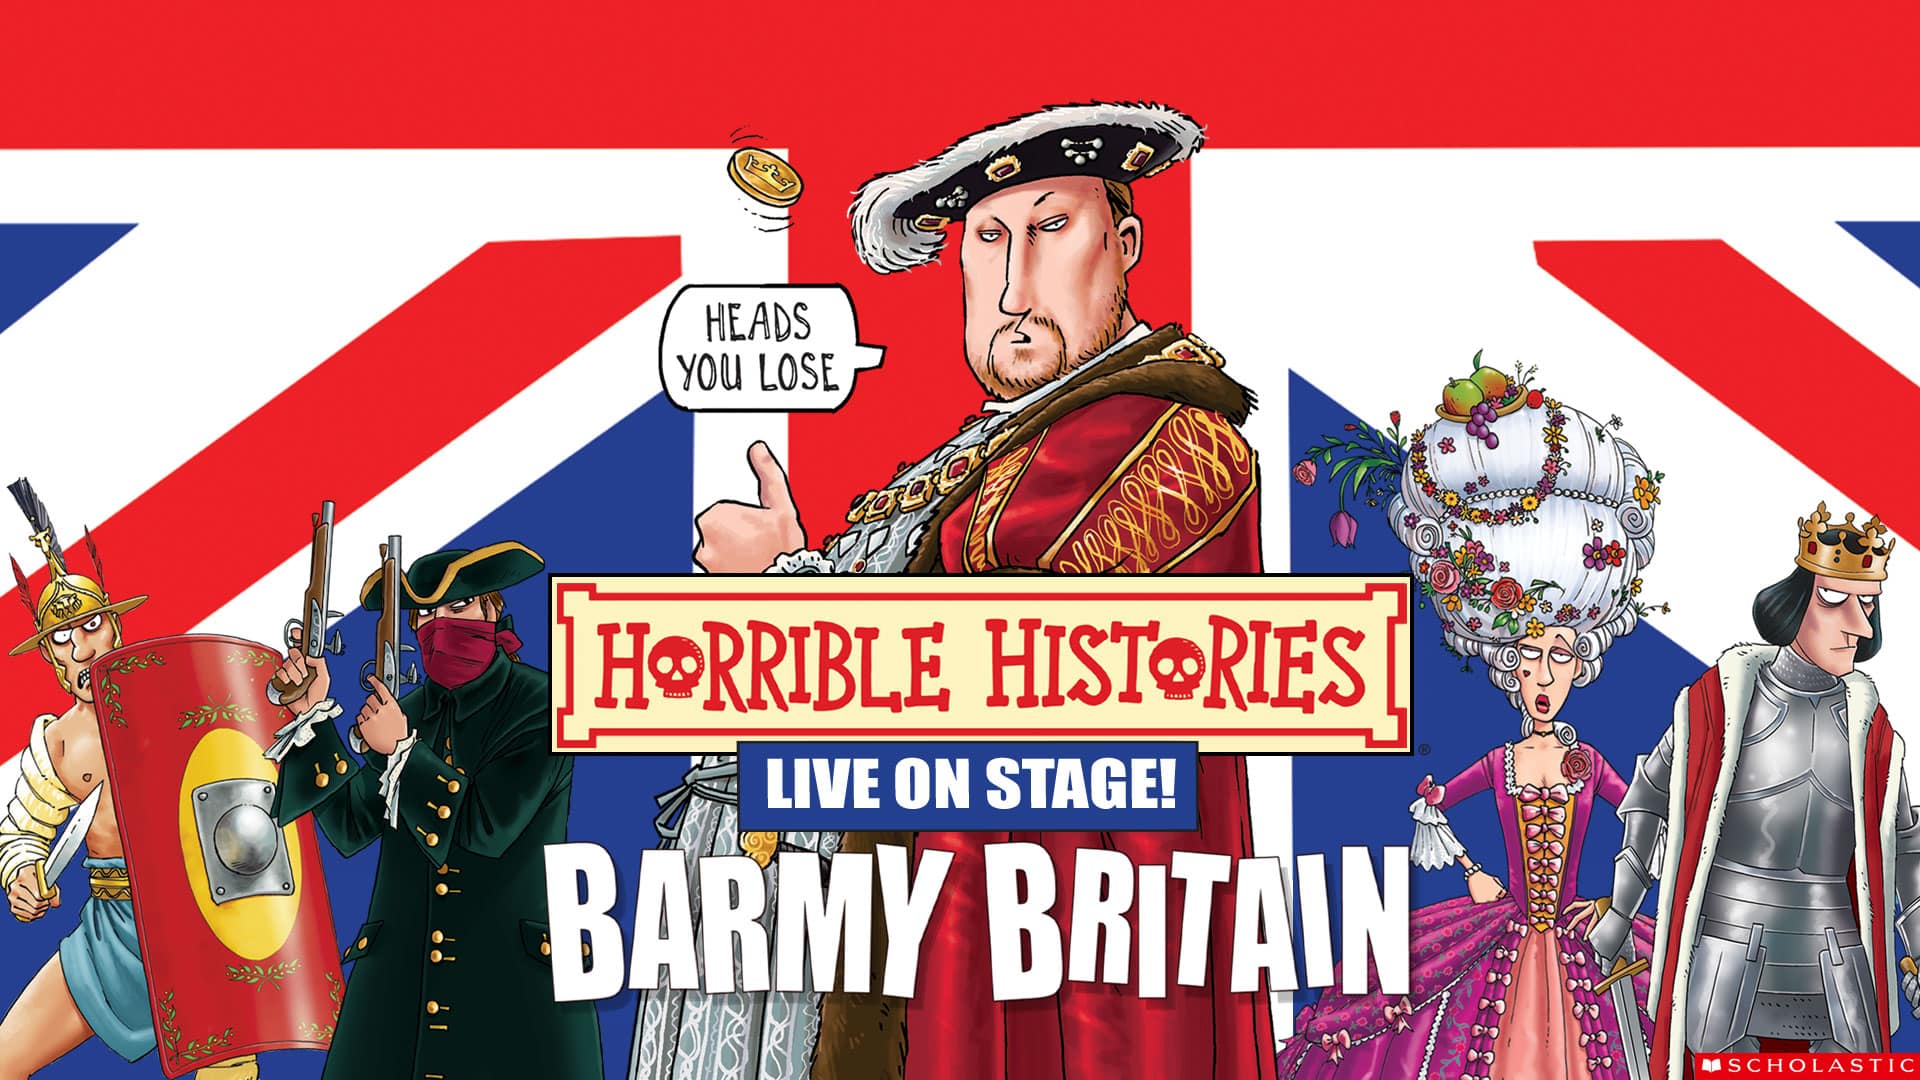 Horrible Histories - Barmy Britain promotional image